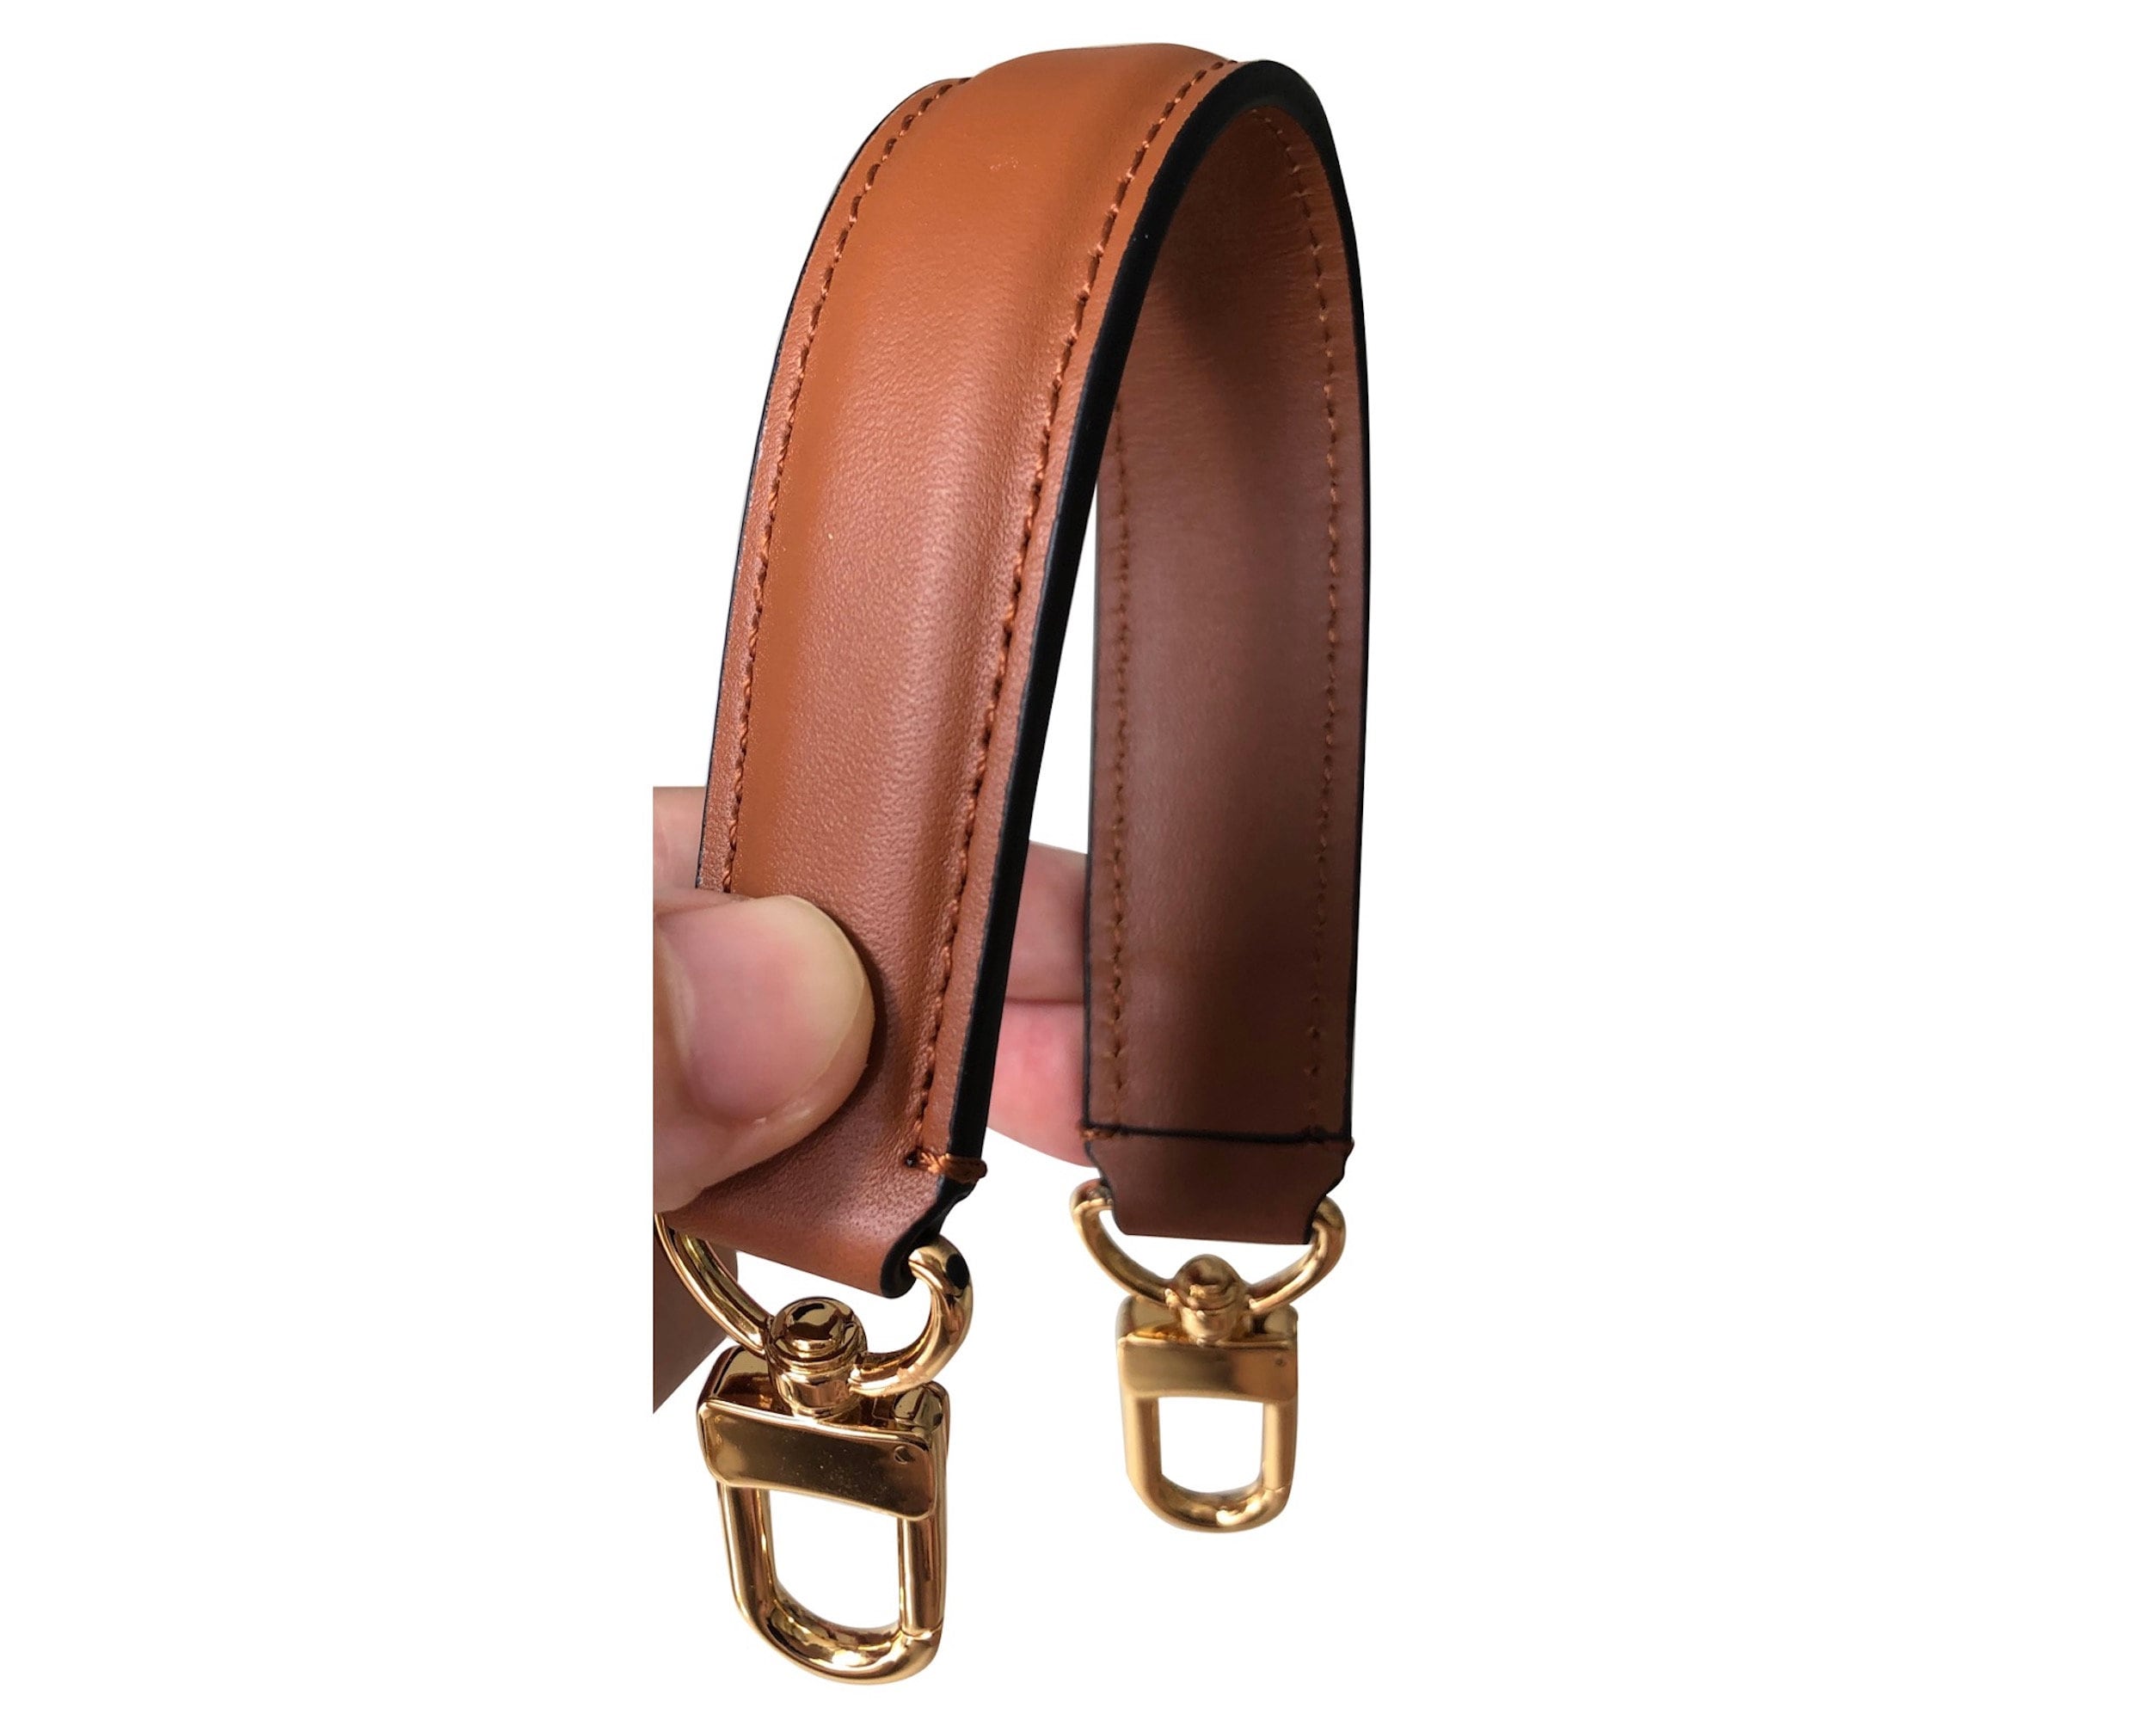 Thick Leather Strap for Handbag With Golden Clasp Hardware -  UK